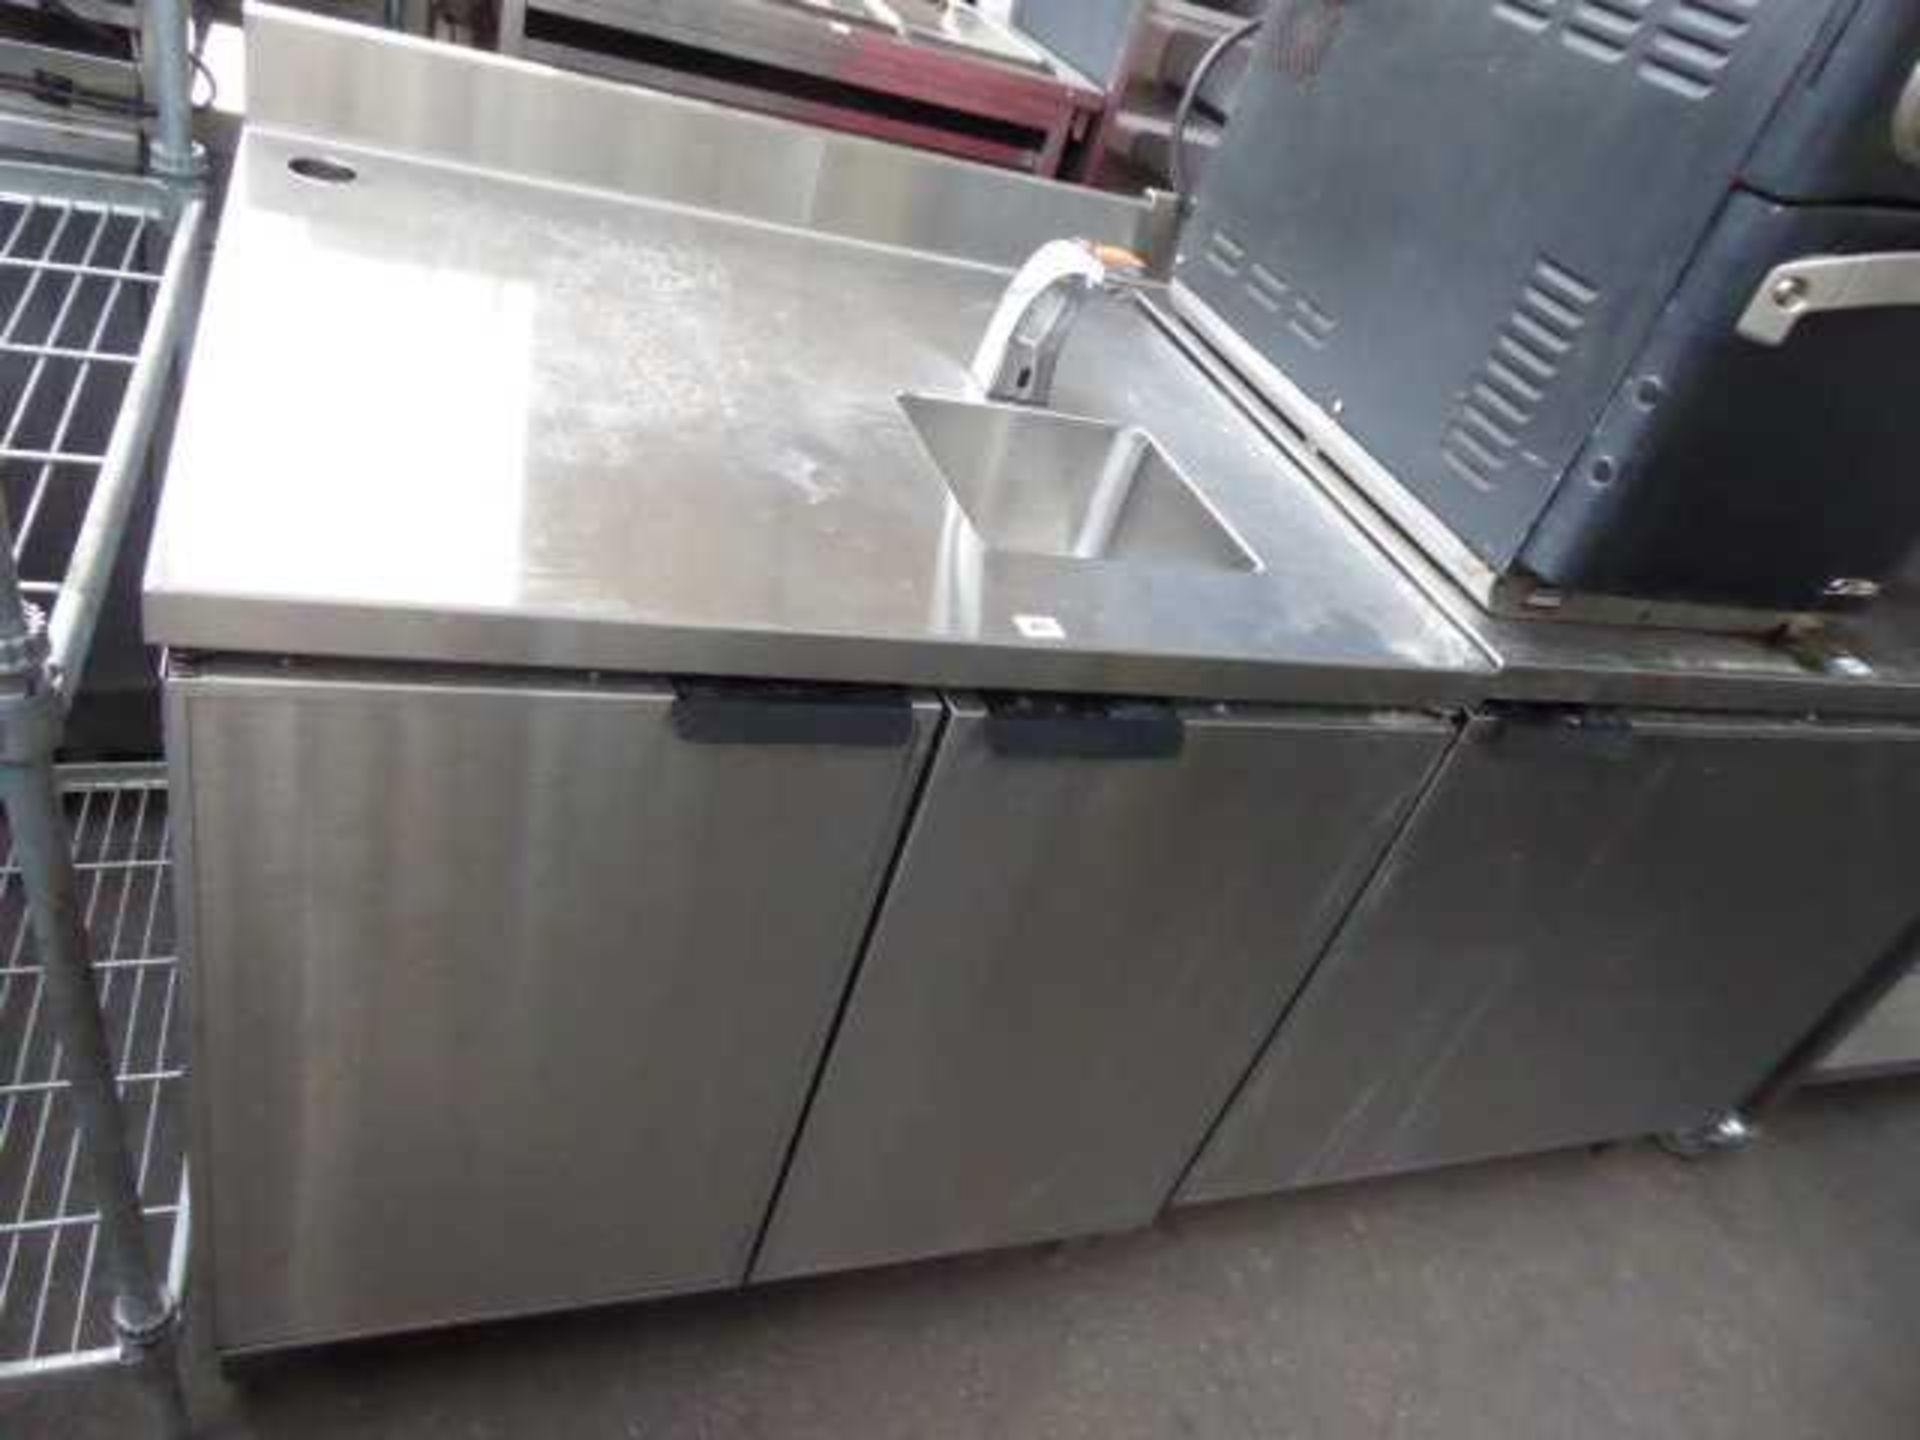 90cm stainless steel surface with small hand basin and double door cabinet under